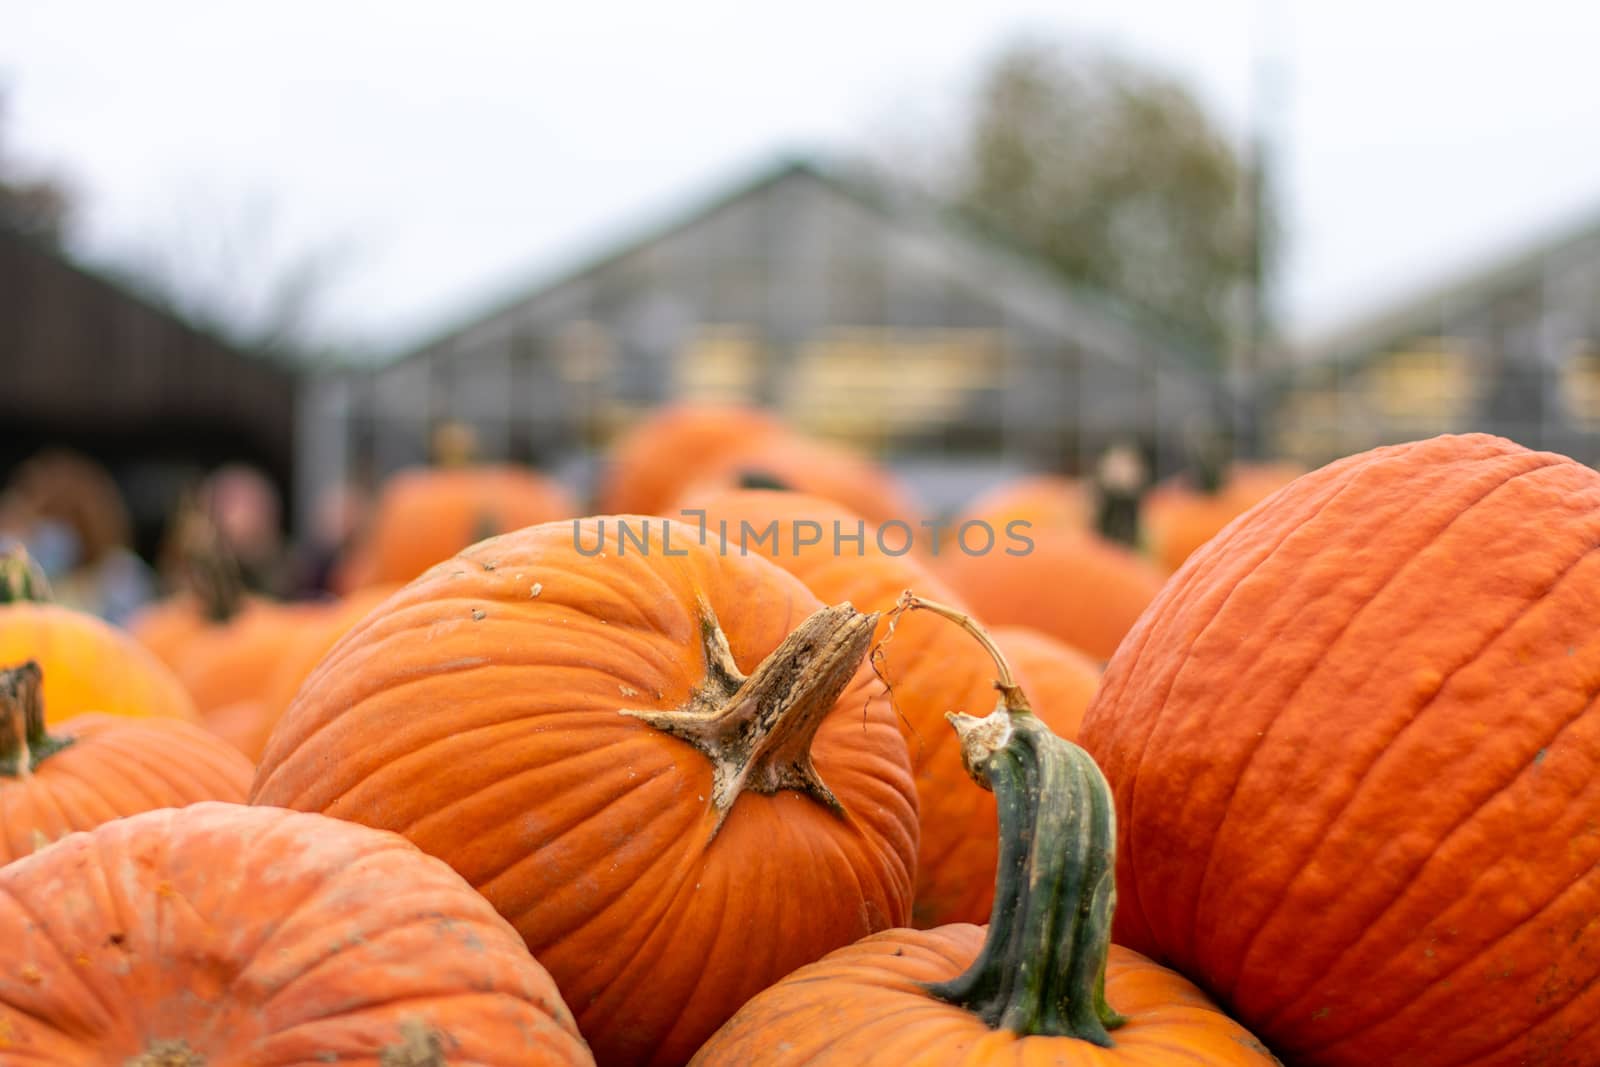 Large Orange Pumpkins in a Pile at a Farmer's Market With a Greenhouse Behind Them